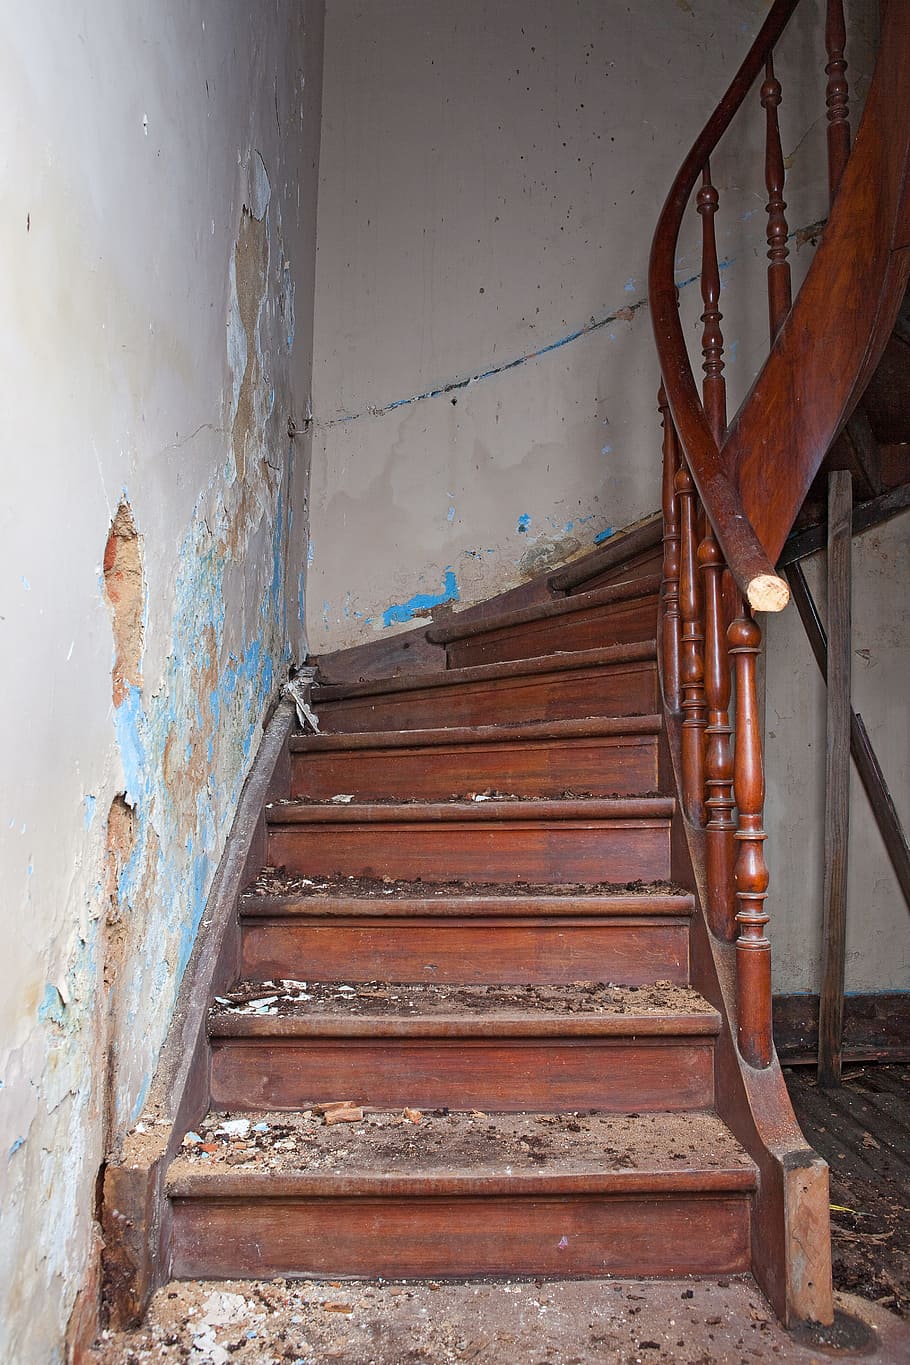 Ladder, Ruin, Steps, Old House, Handrail, demolition, staircase, abandoned, old, rusty